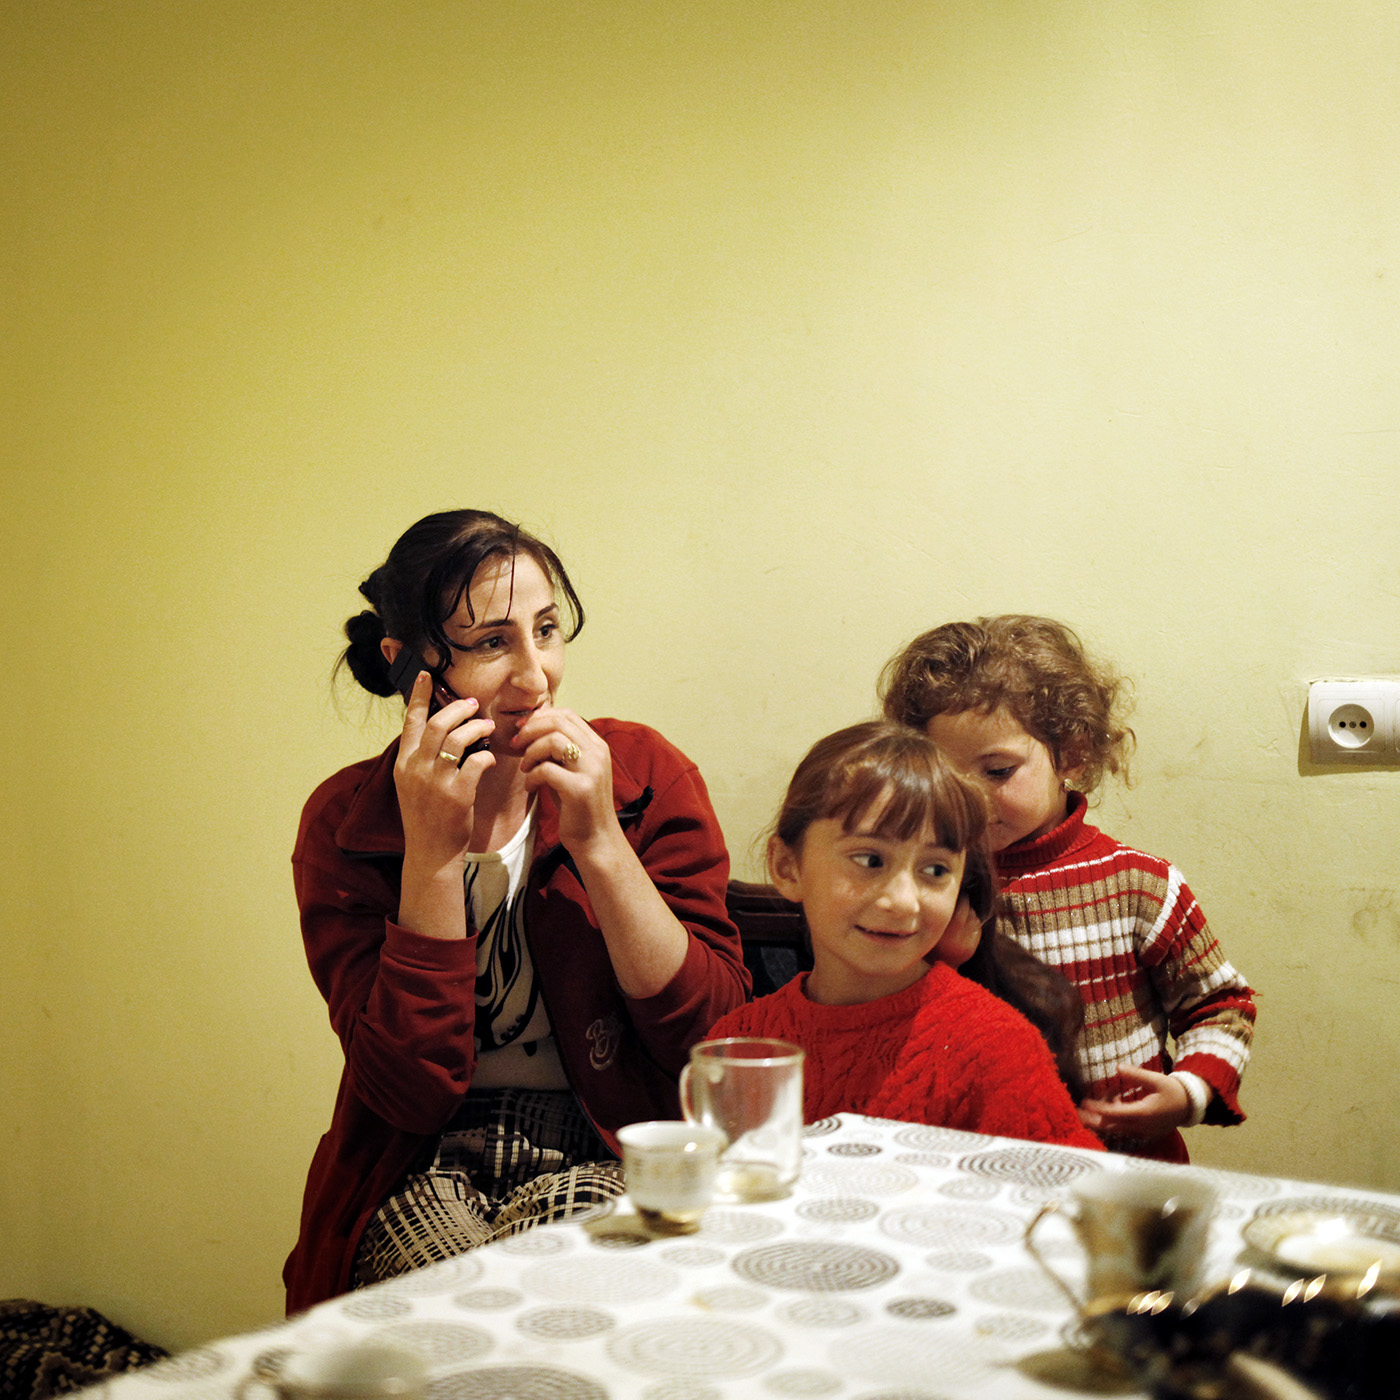  Anoush is calling her husband in Russia. On her the right are her two daughters, Lilith is doing Asmik's hair. 